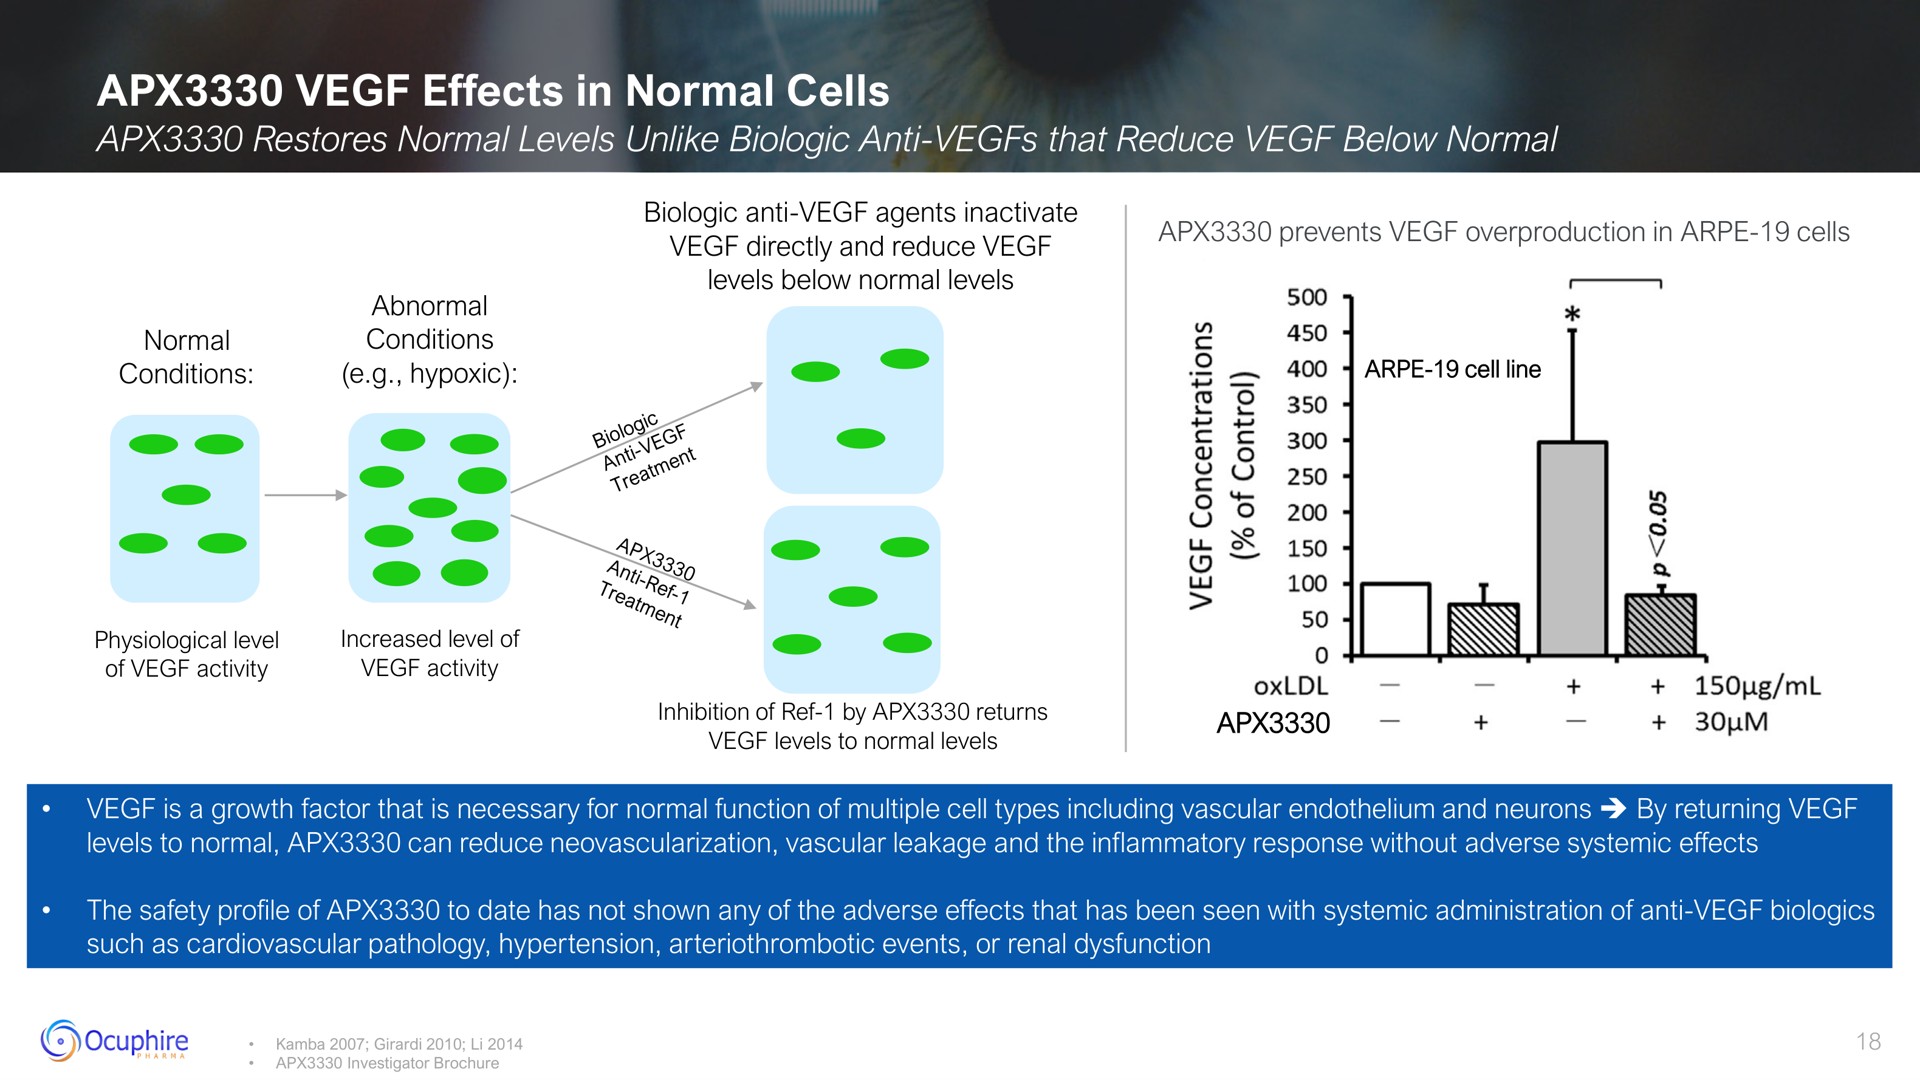 effects in normal cells | Ocuphire Pharma